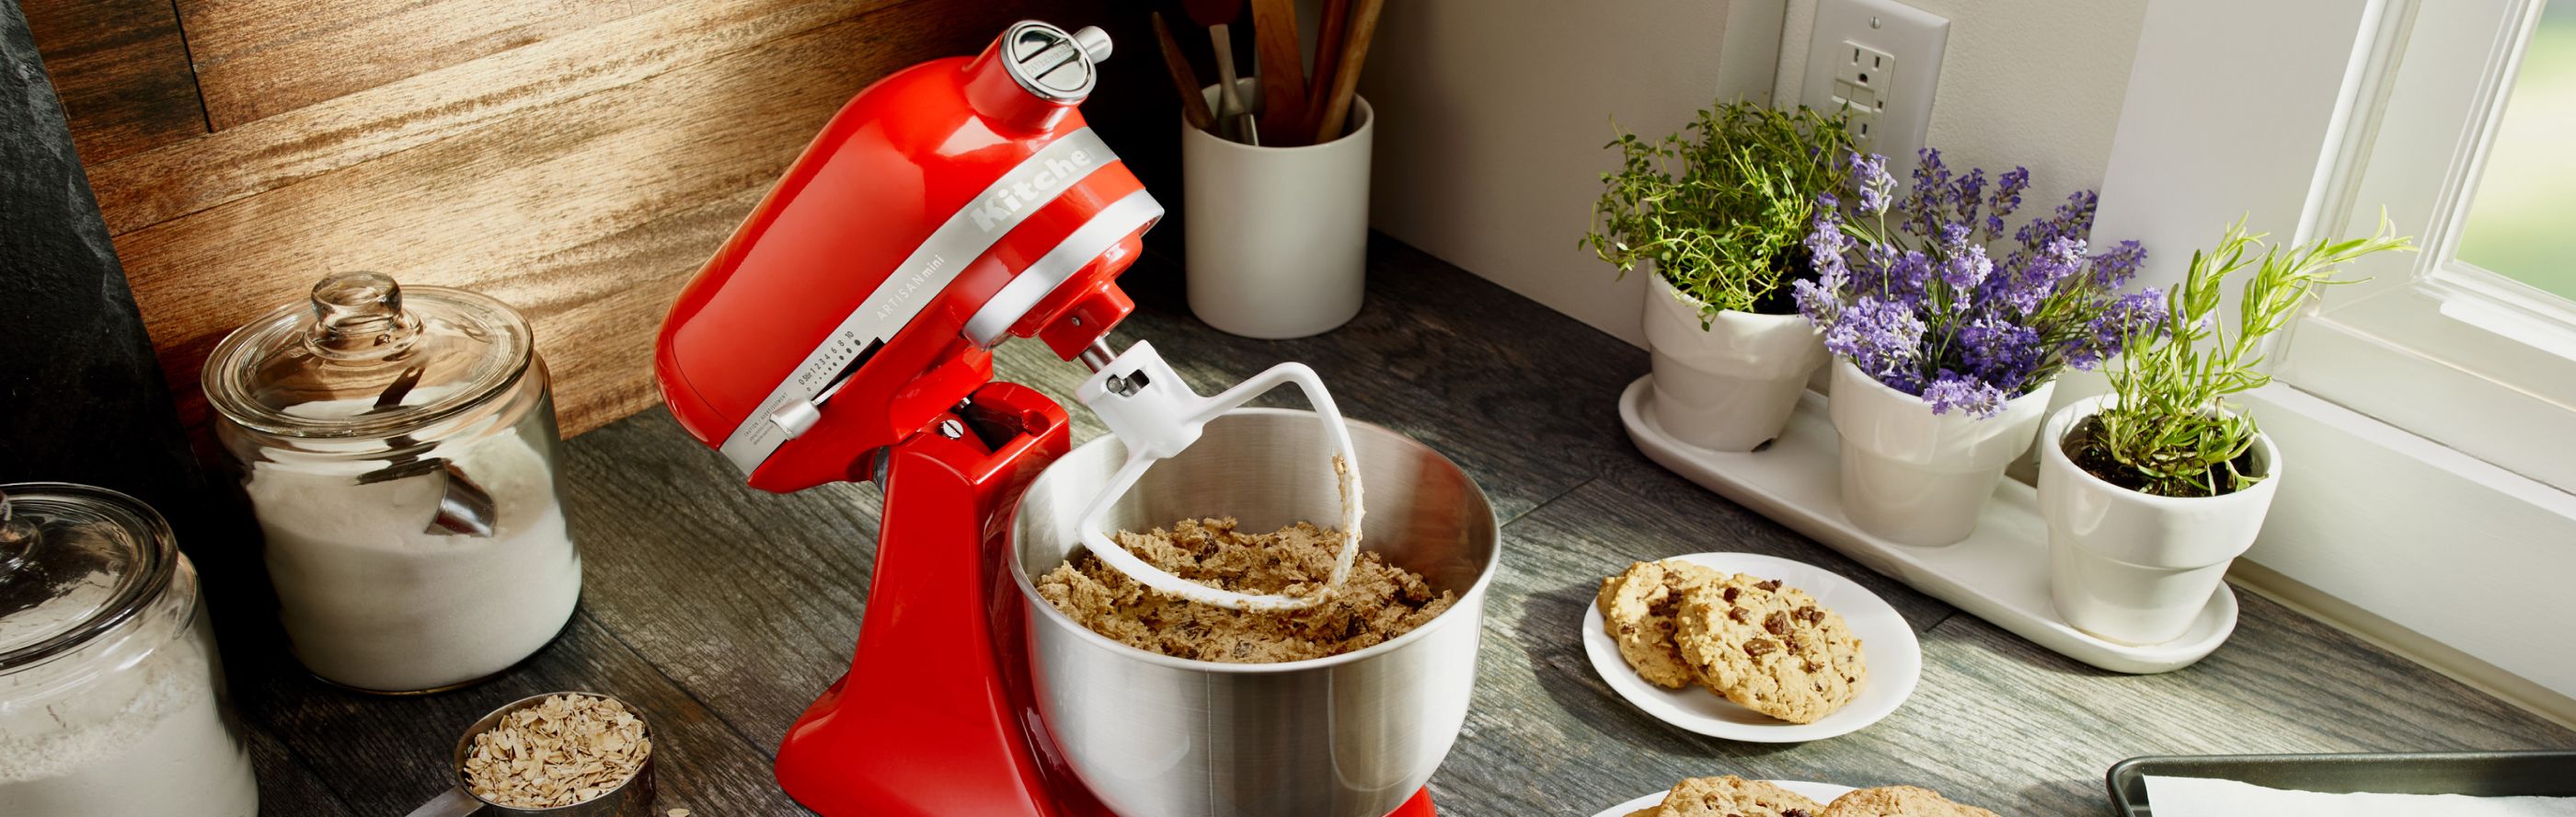 A red KitchenAid® stand mixer used to mix dough for chocolate chip cookies 